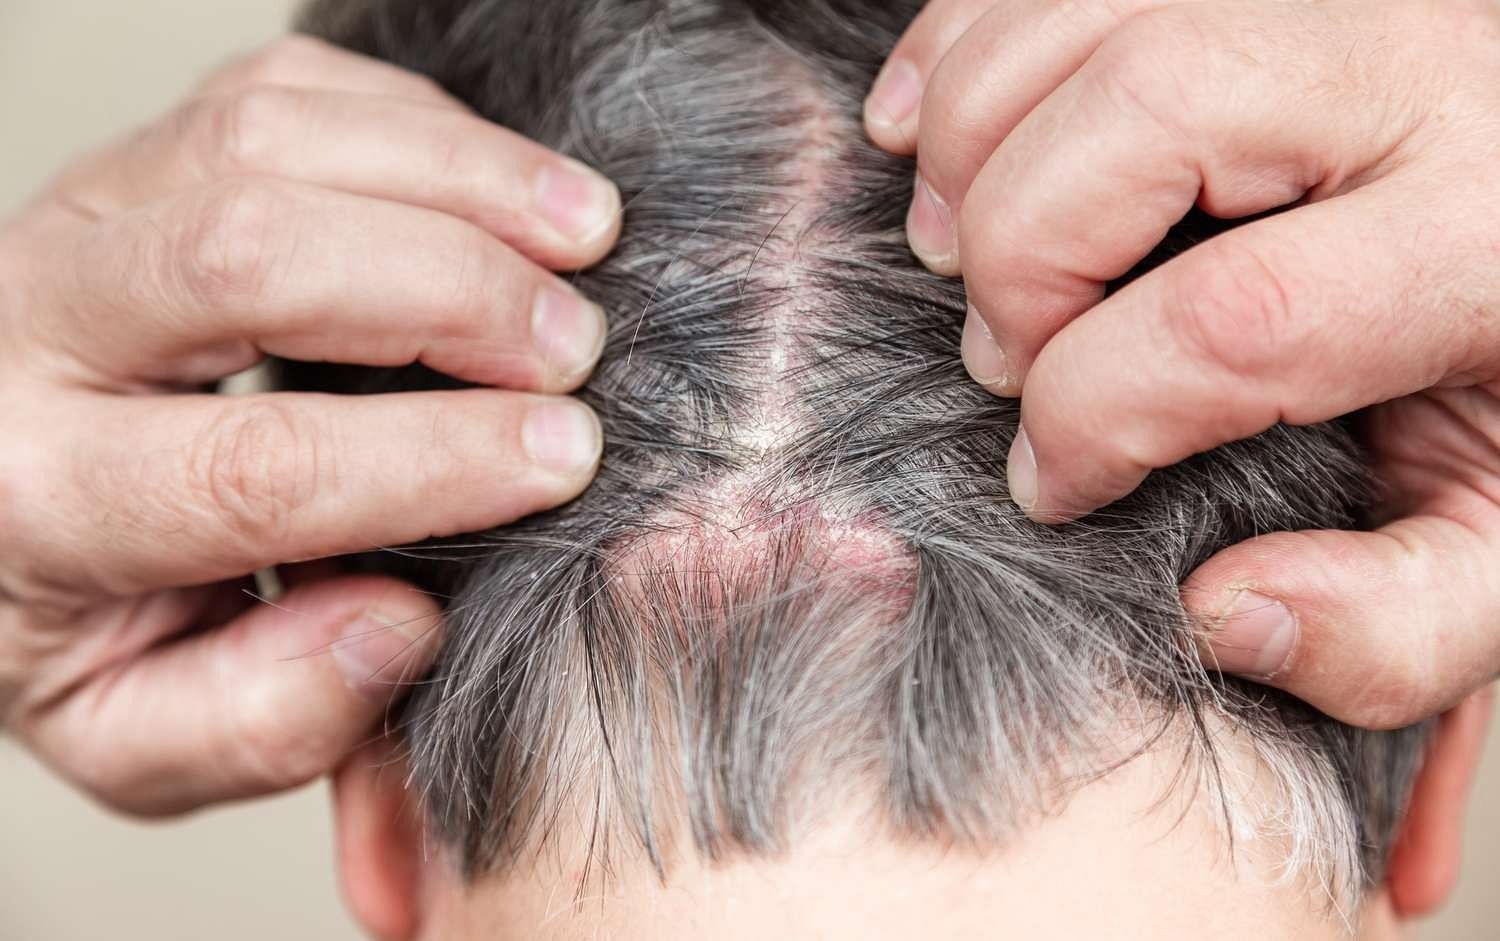 Scalp scabs (Image via Getty Images)